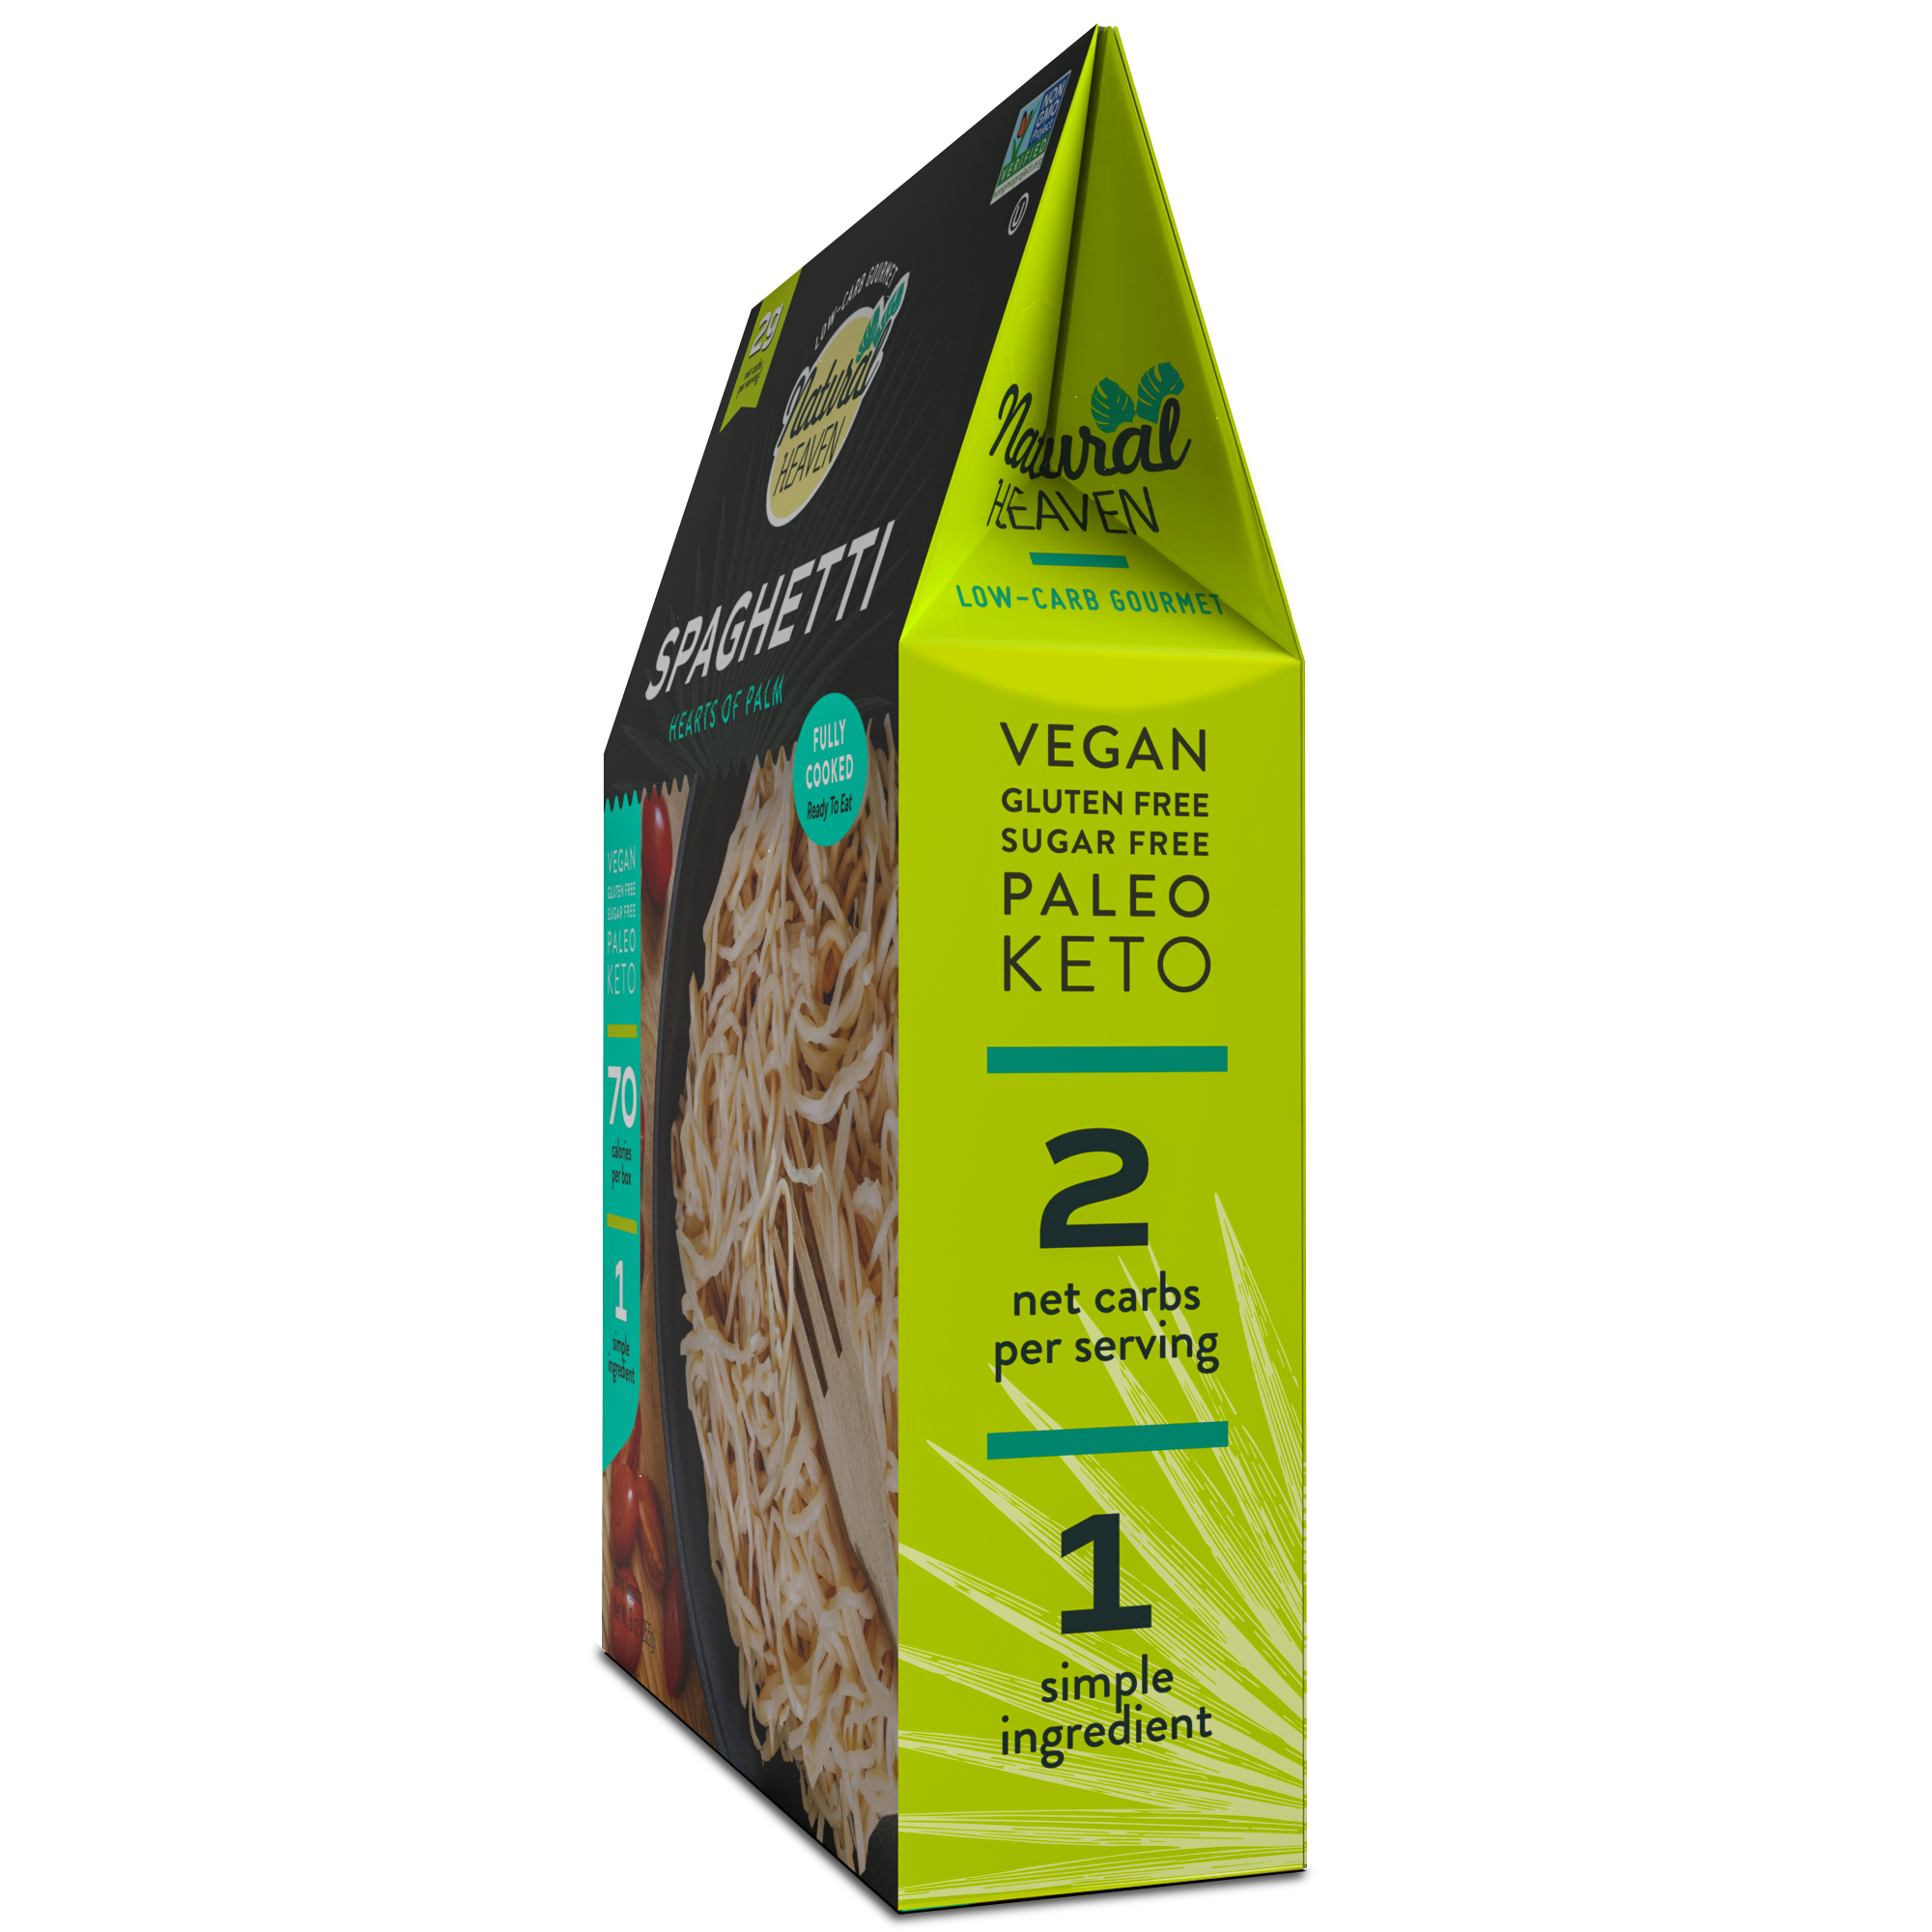 Veggie Pasta Hearts of Palm Noodles by Natural Heaven - Spaghetti - High-quality Pasta by Natural Heaven at 